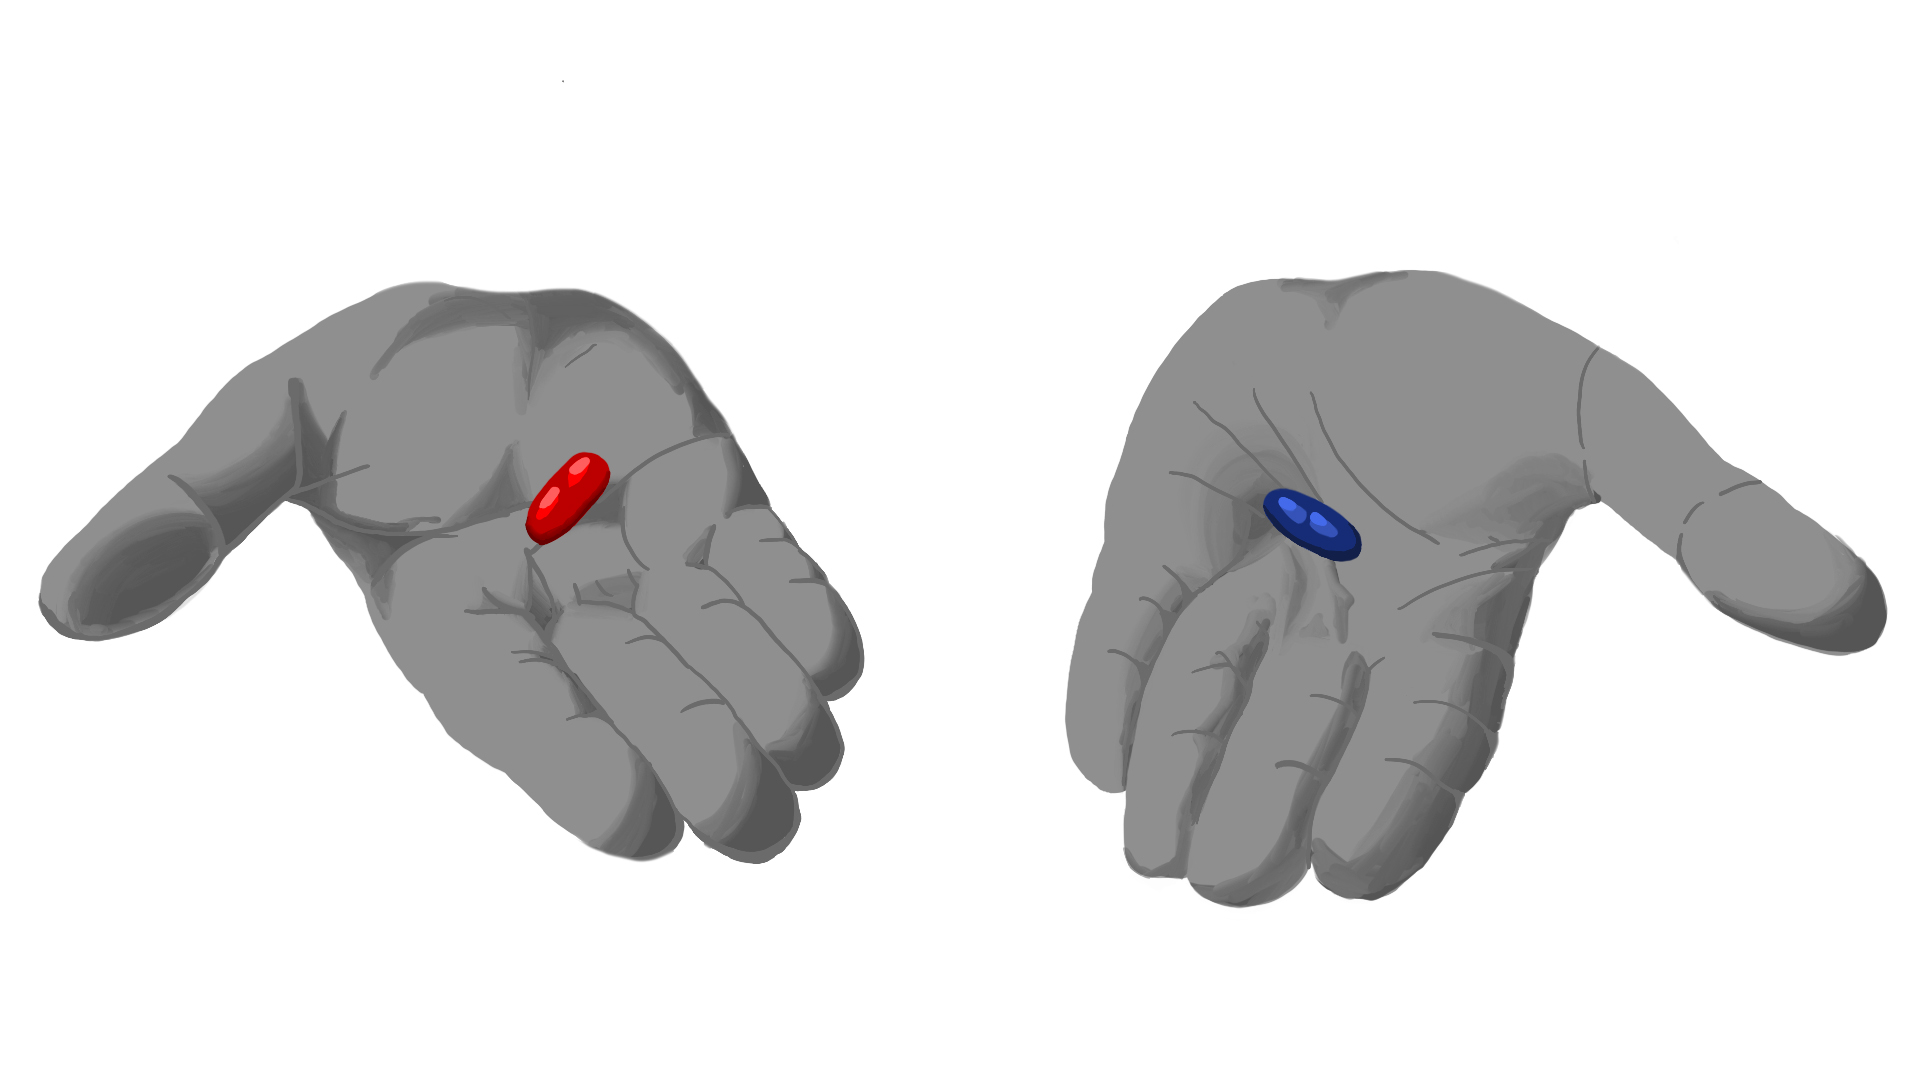 Hands showing a red pill and a blue pill